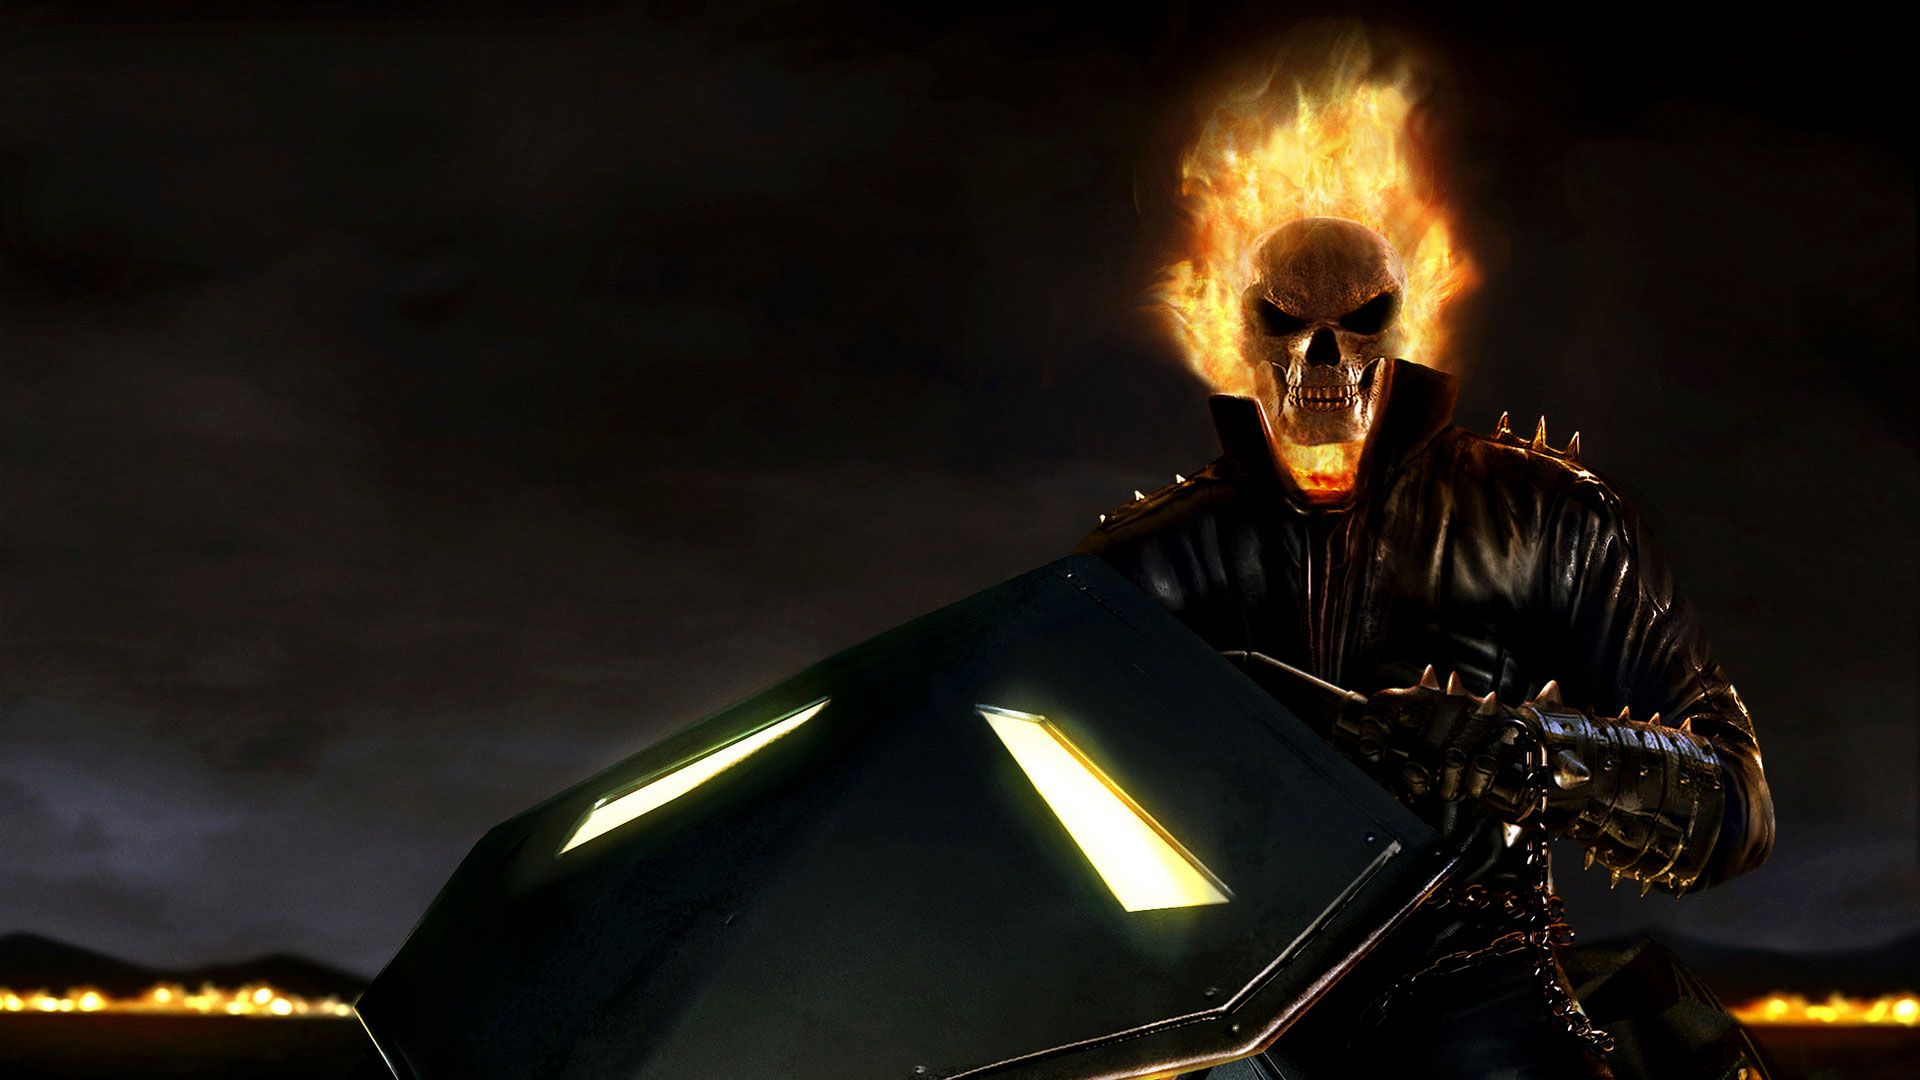 Hd 4k Wallpaper For Pc Ghost Rider